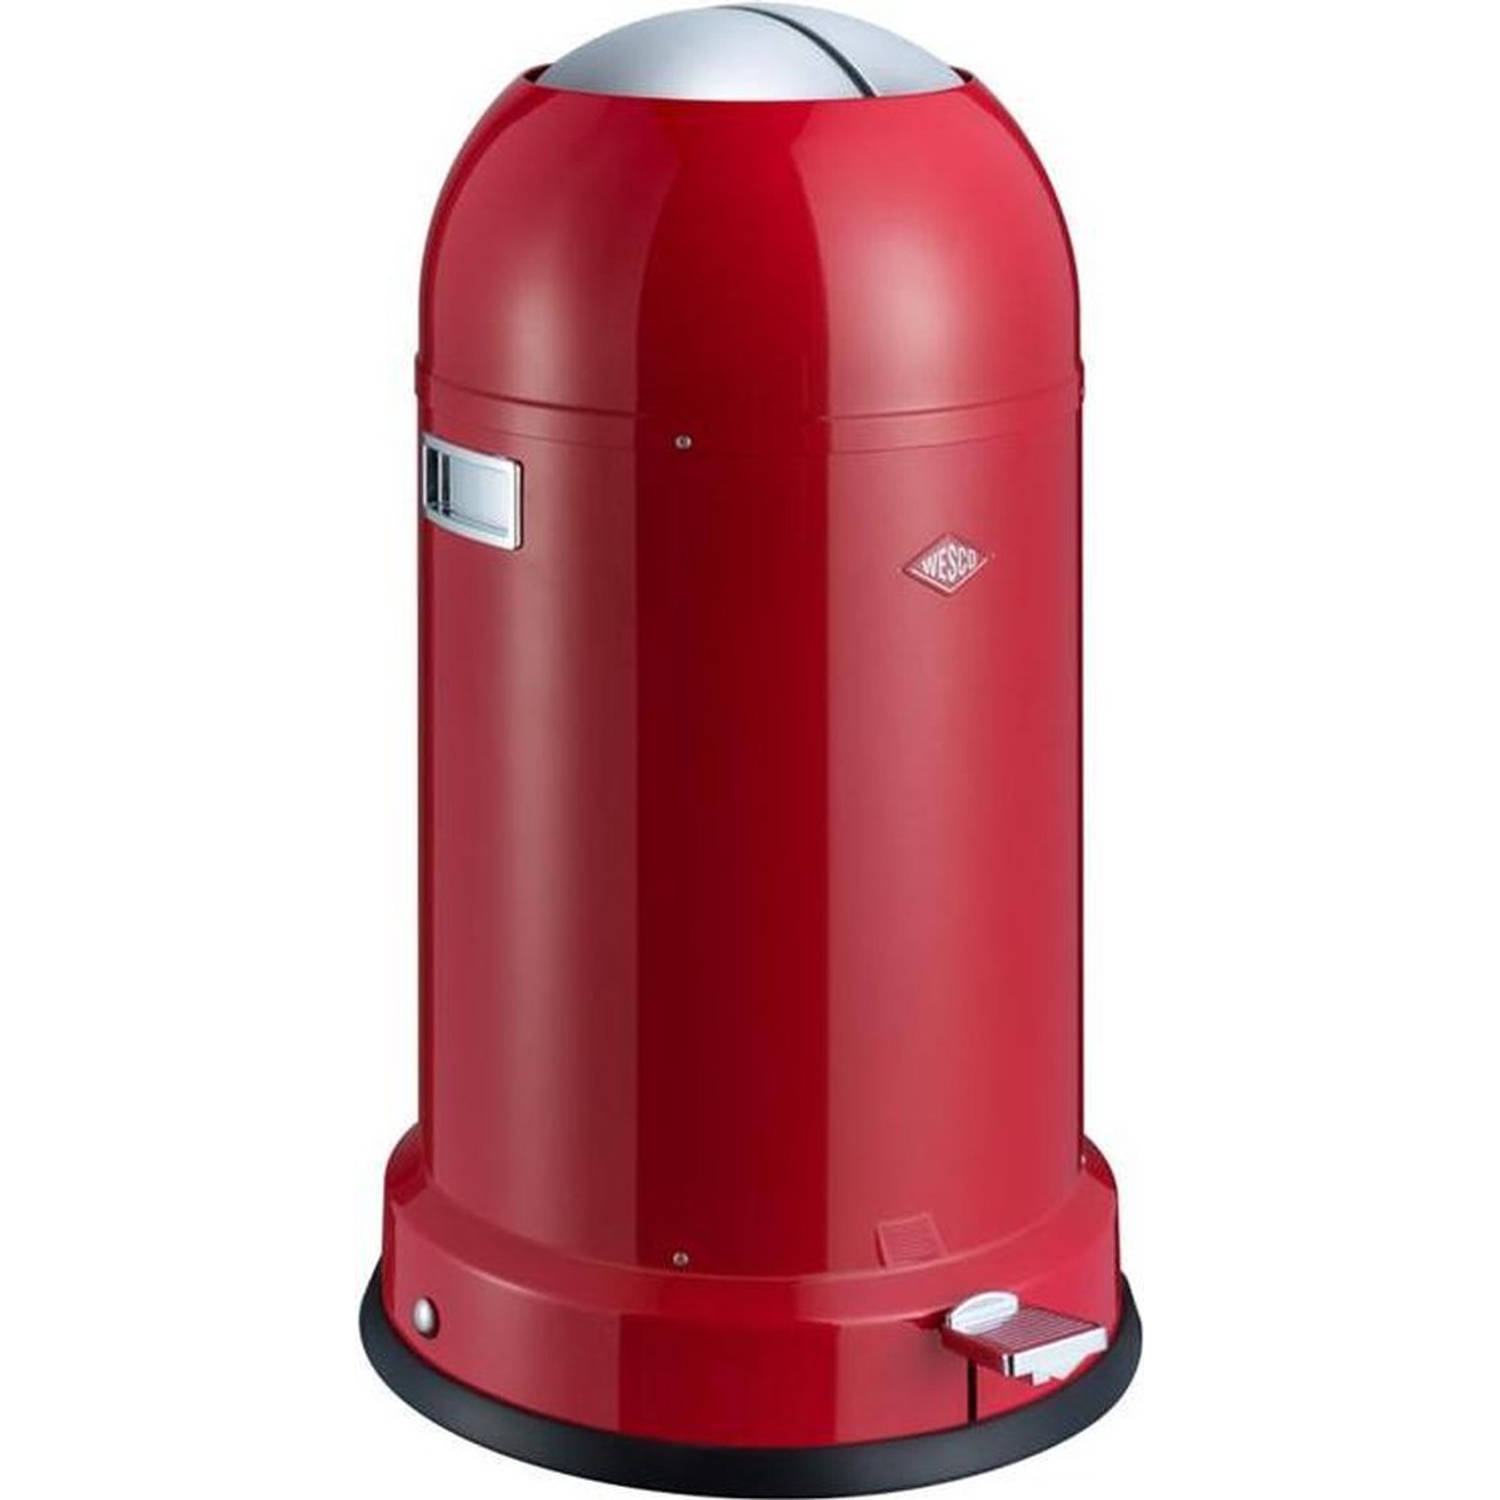 WESCO Kickmaster Classic rood pedaalemmer (826380)